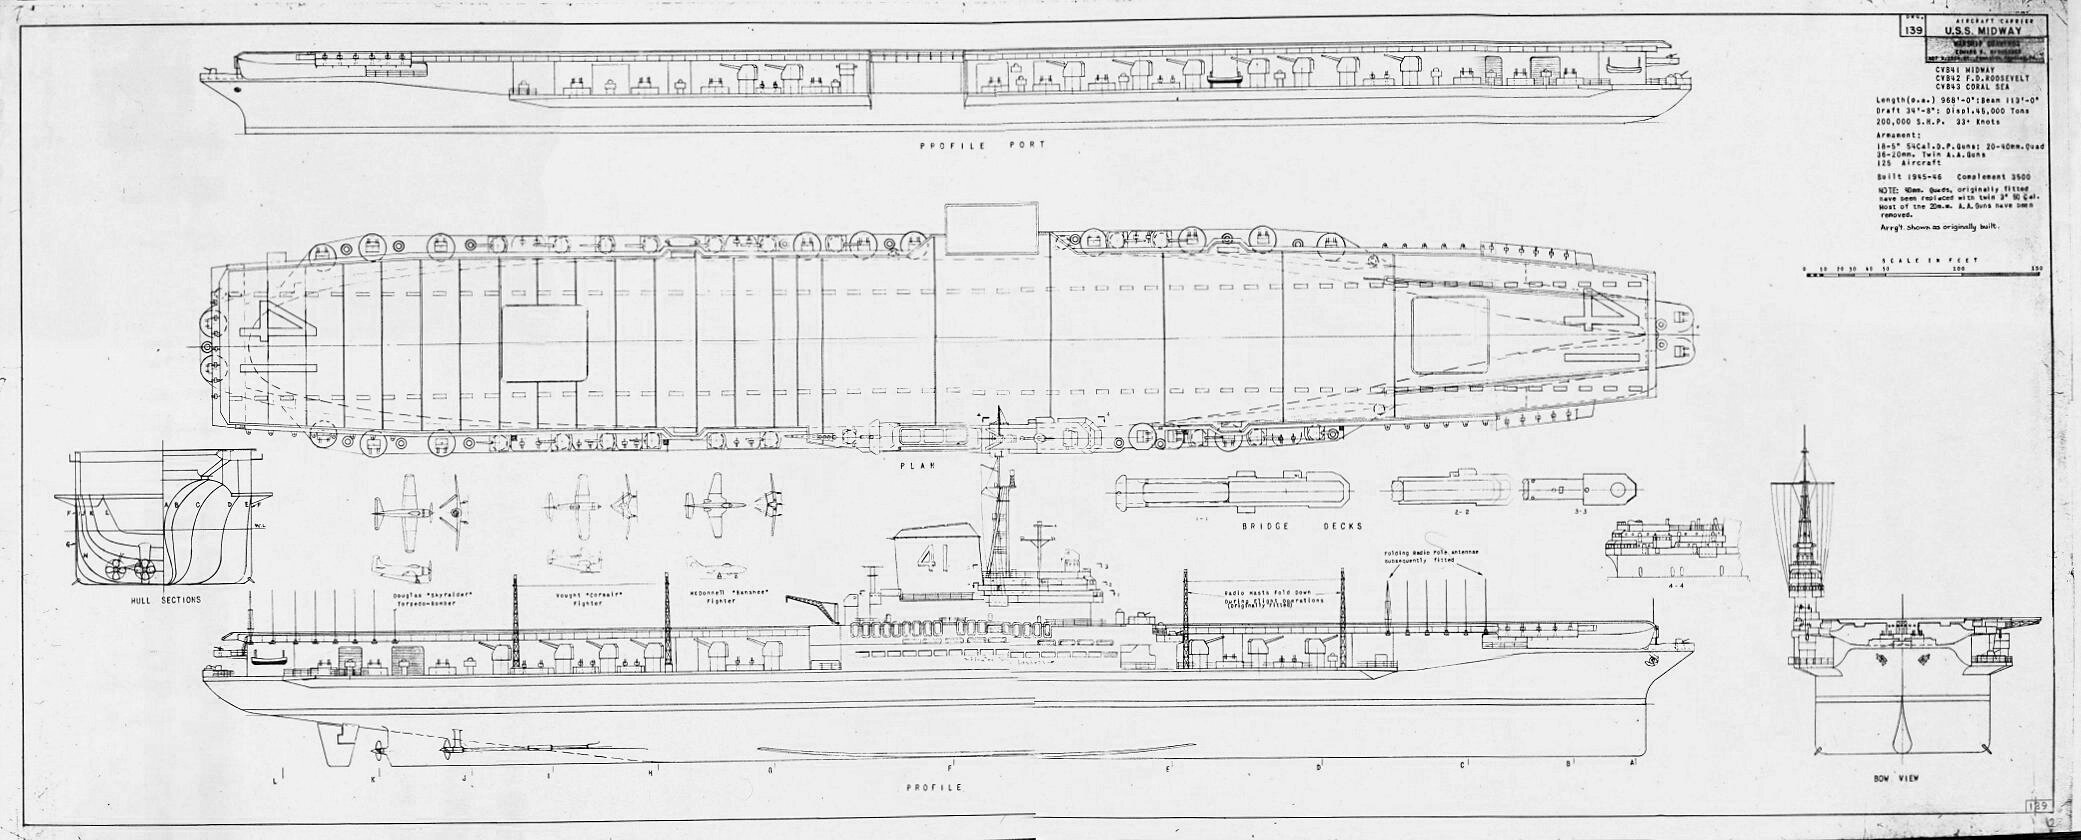 USS MIDWAY ship plans 